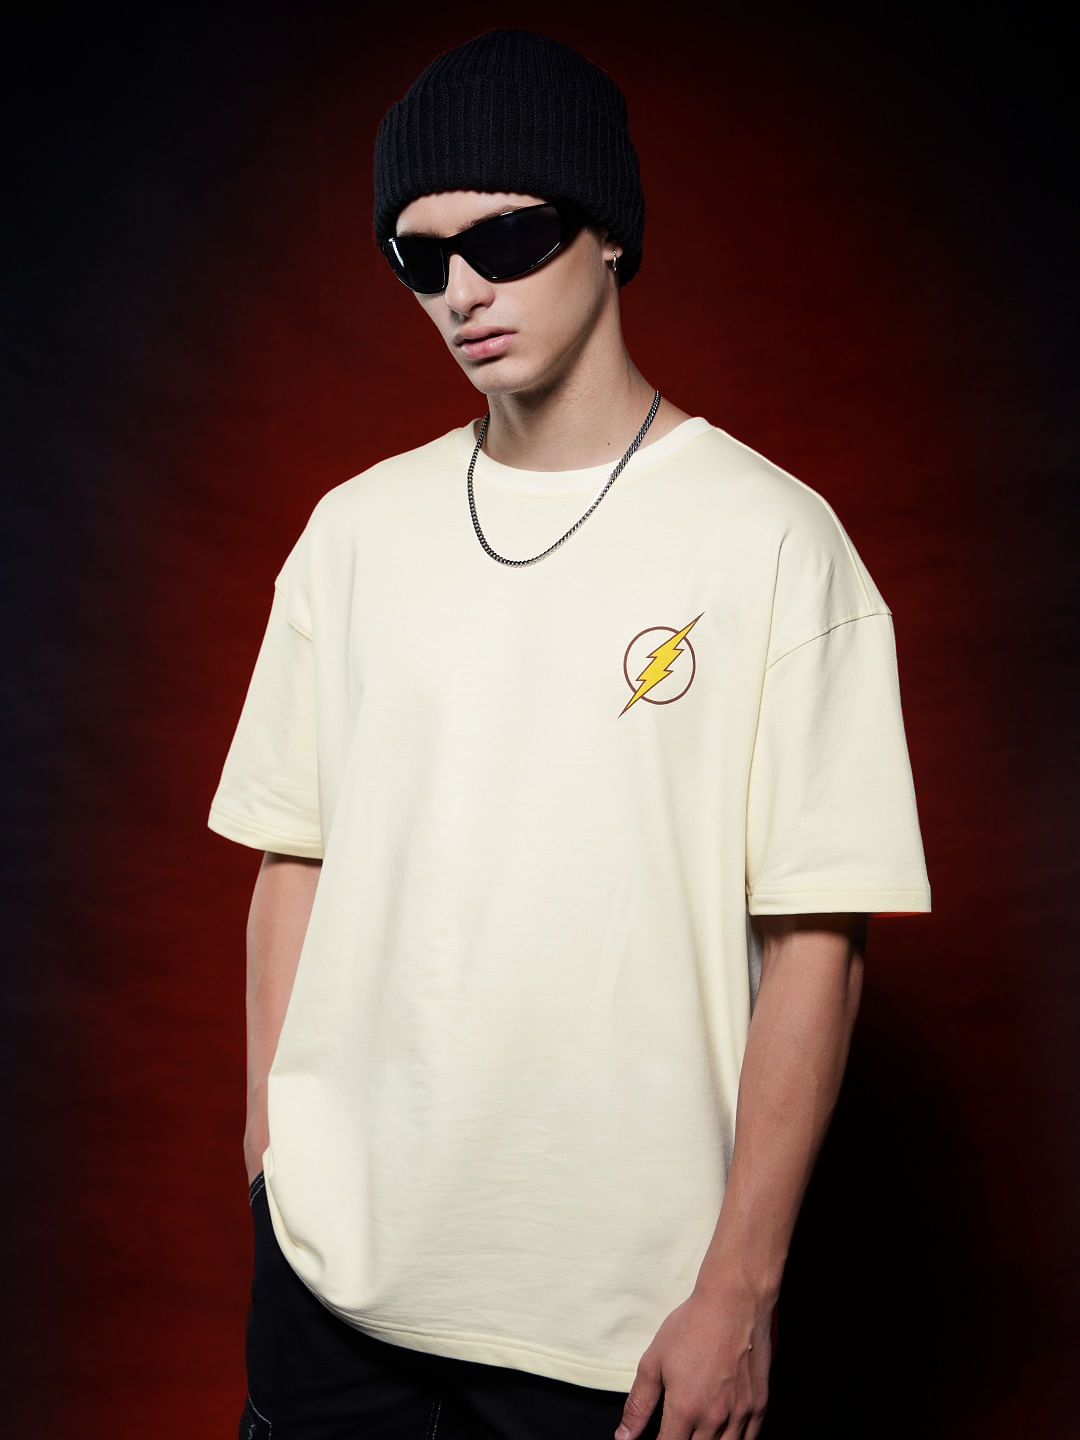 Buy The Flash: Time To Go Oversized T-Shirts Online